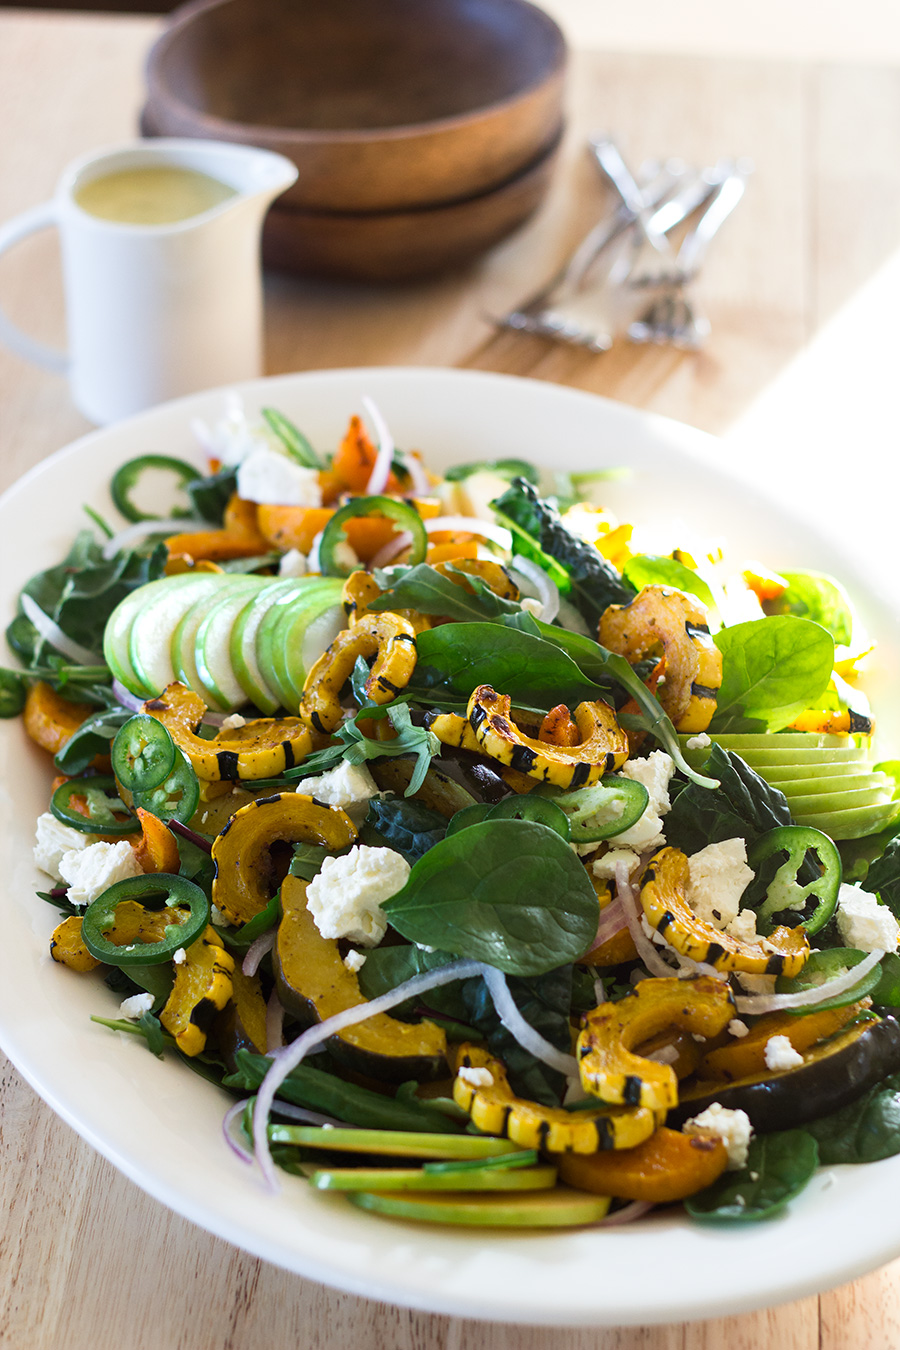 Grab the recipe for the Roasted Winter Squash Salad loaded with roasted squash, crisp apples, field greens, feta cheese and a sage-honey vinaigrette! Recipe at www.designsofanykind.com